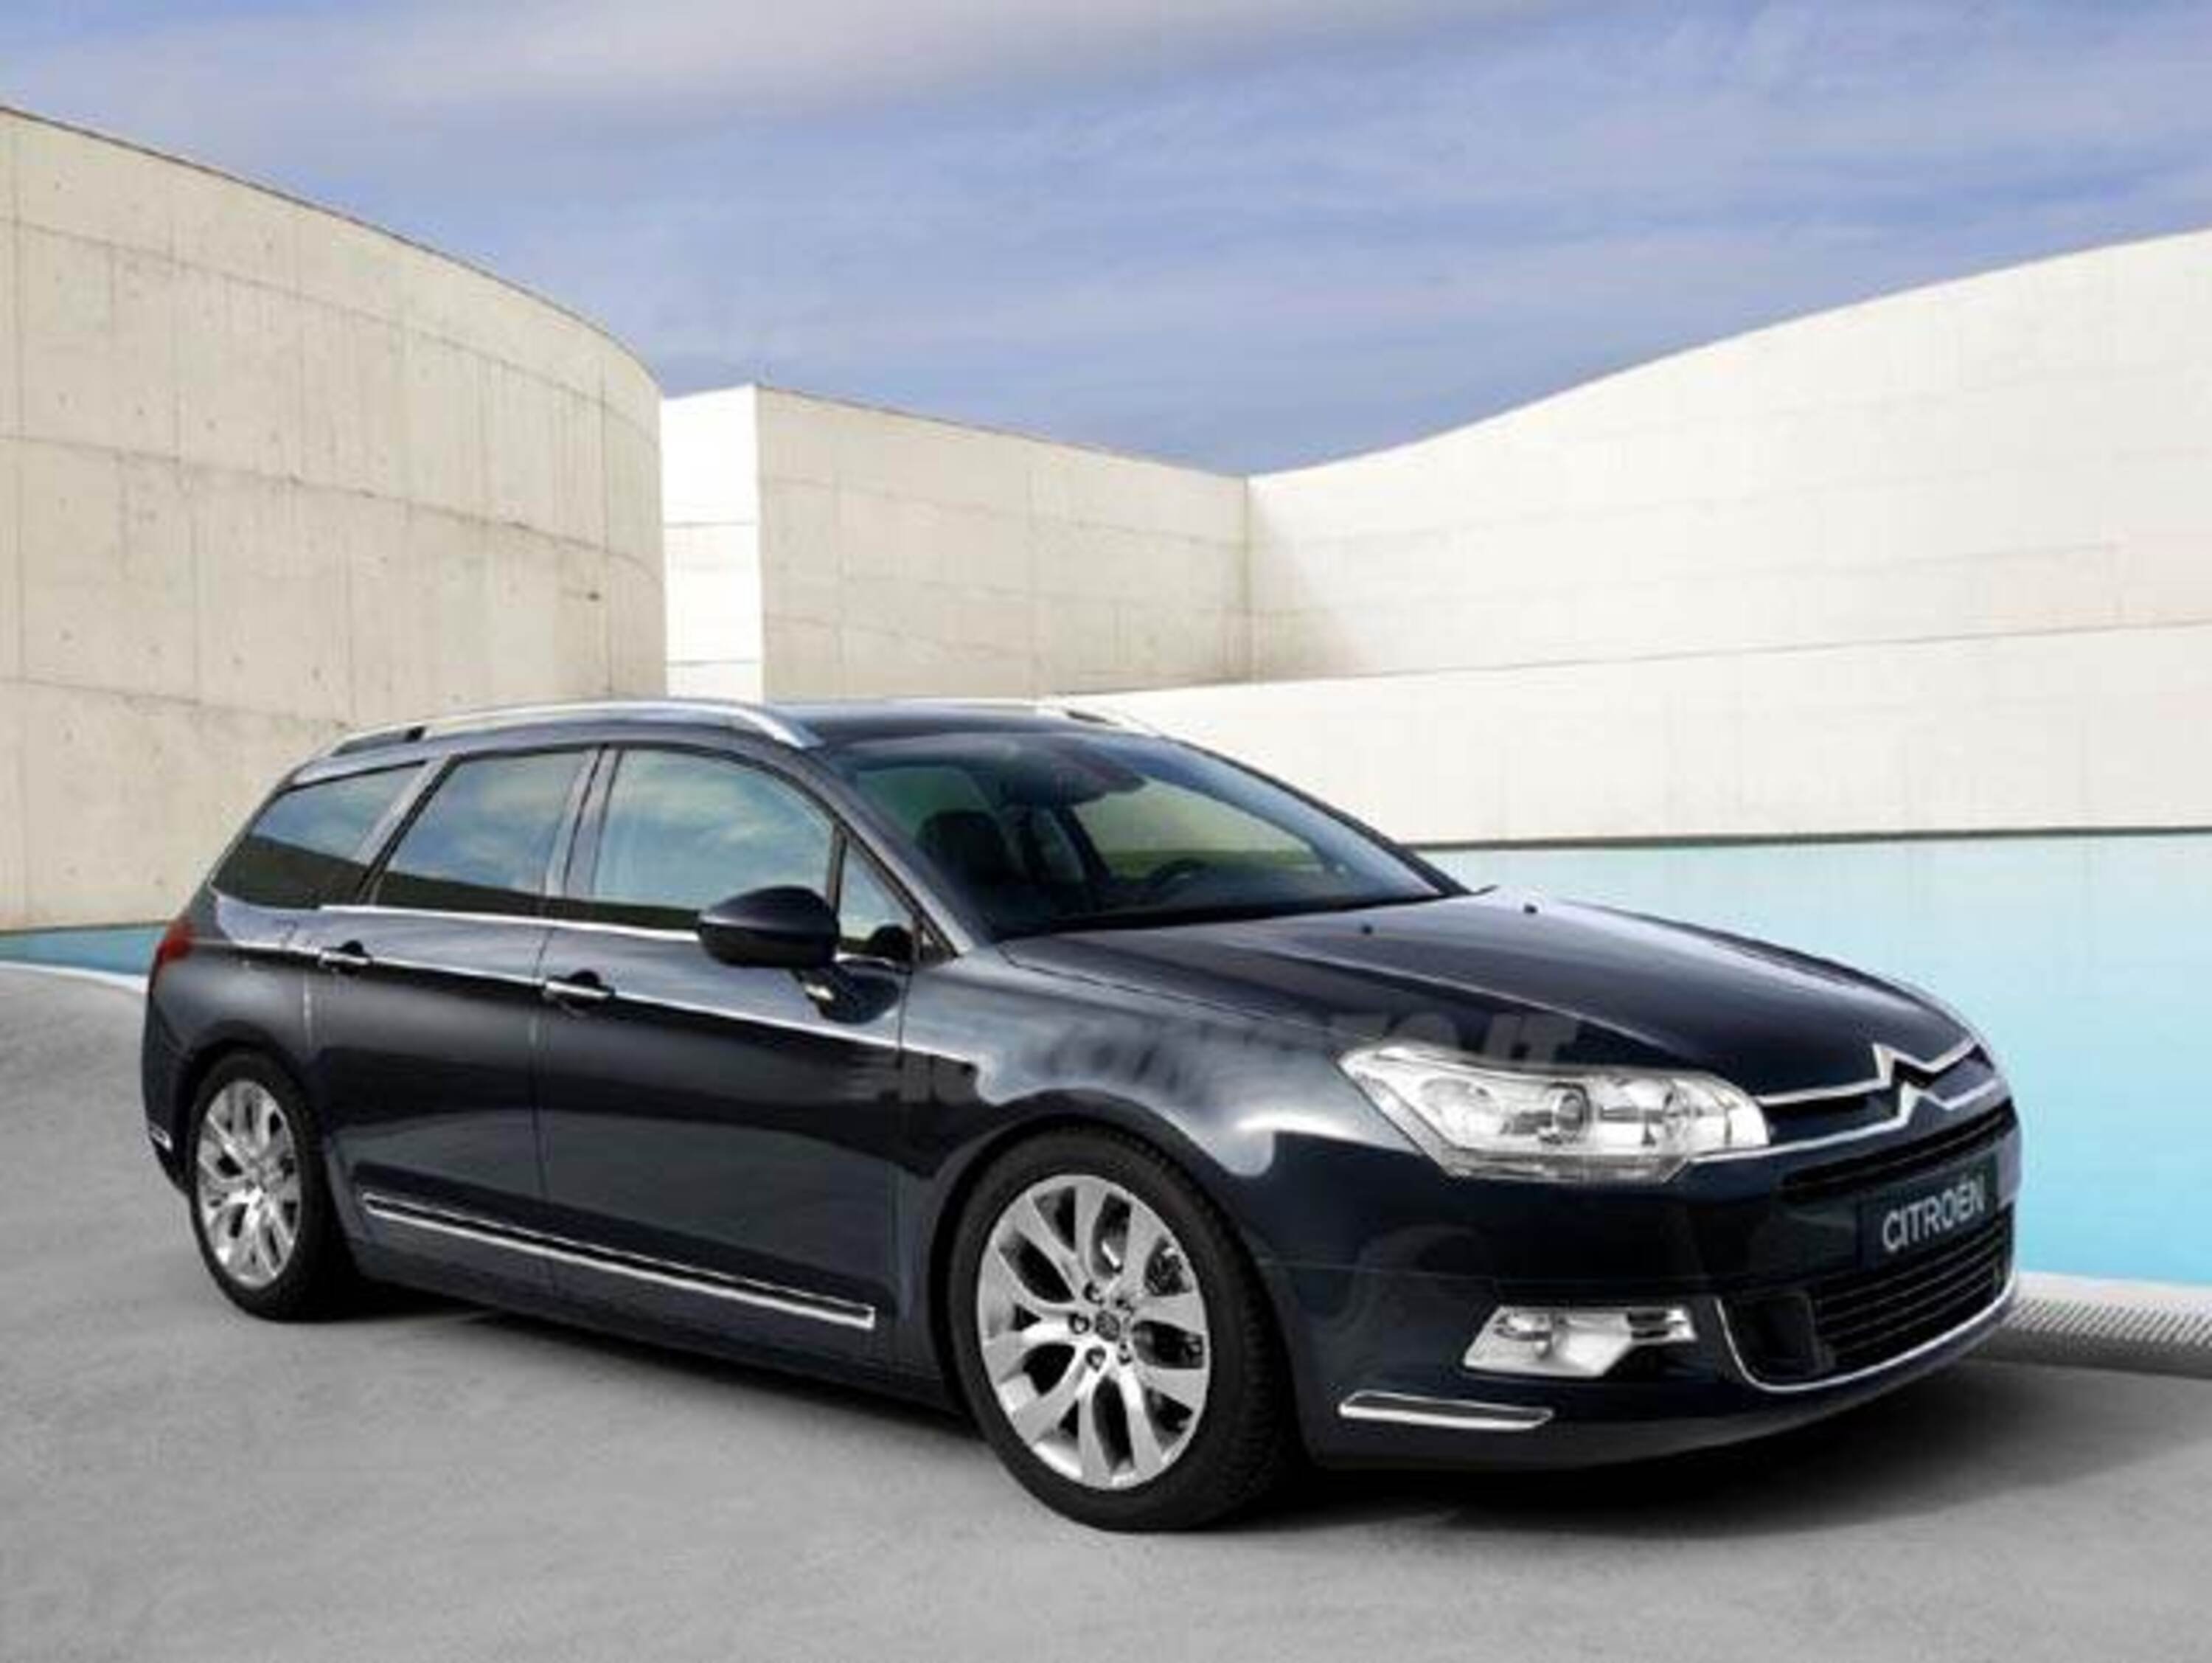 Citroen C5 Station Wagon 2.0 HDi 140 Exclusive Style